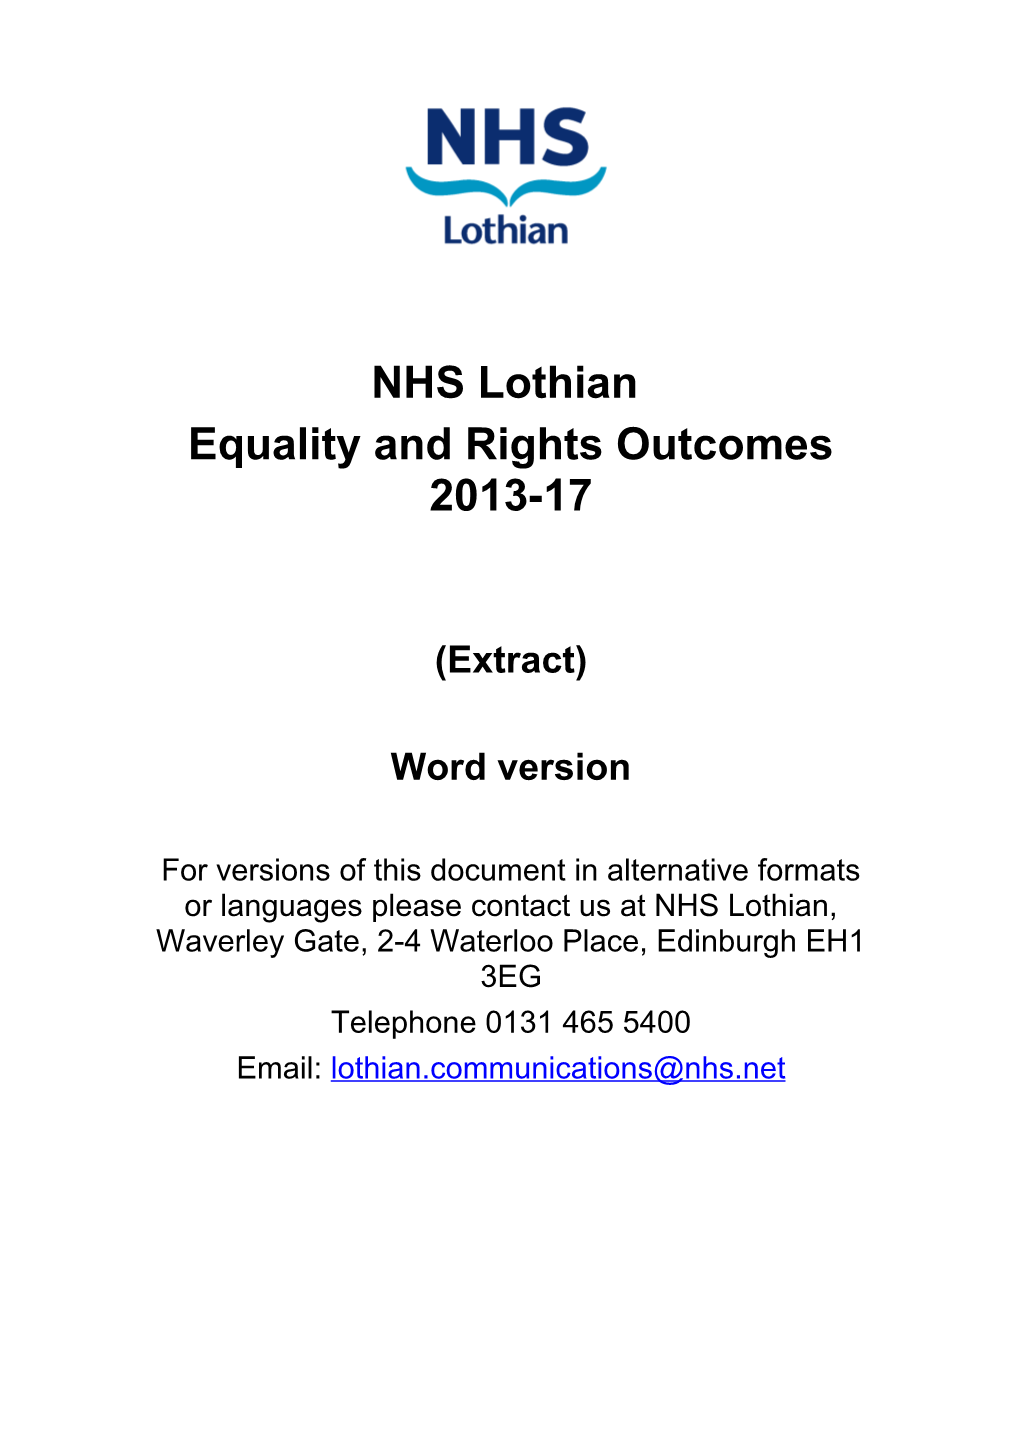 Welcome to the NHS Lothian Equality and Rights Outcomes